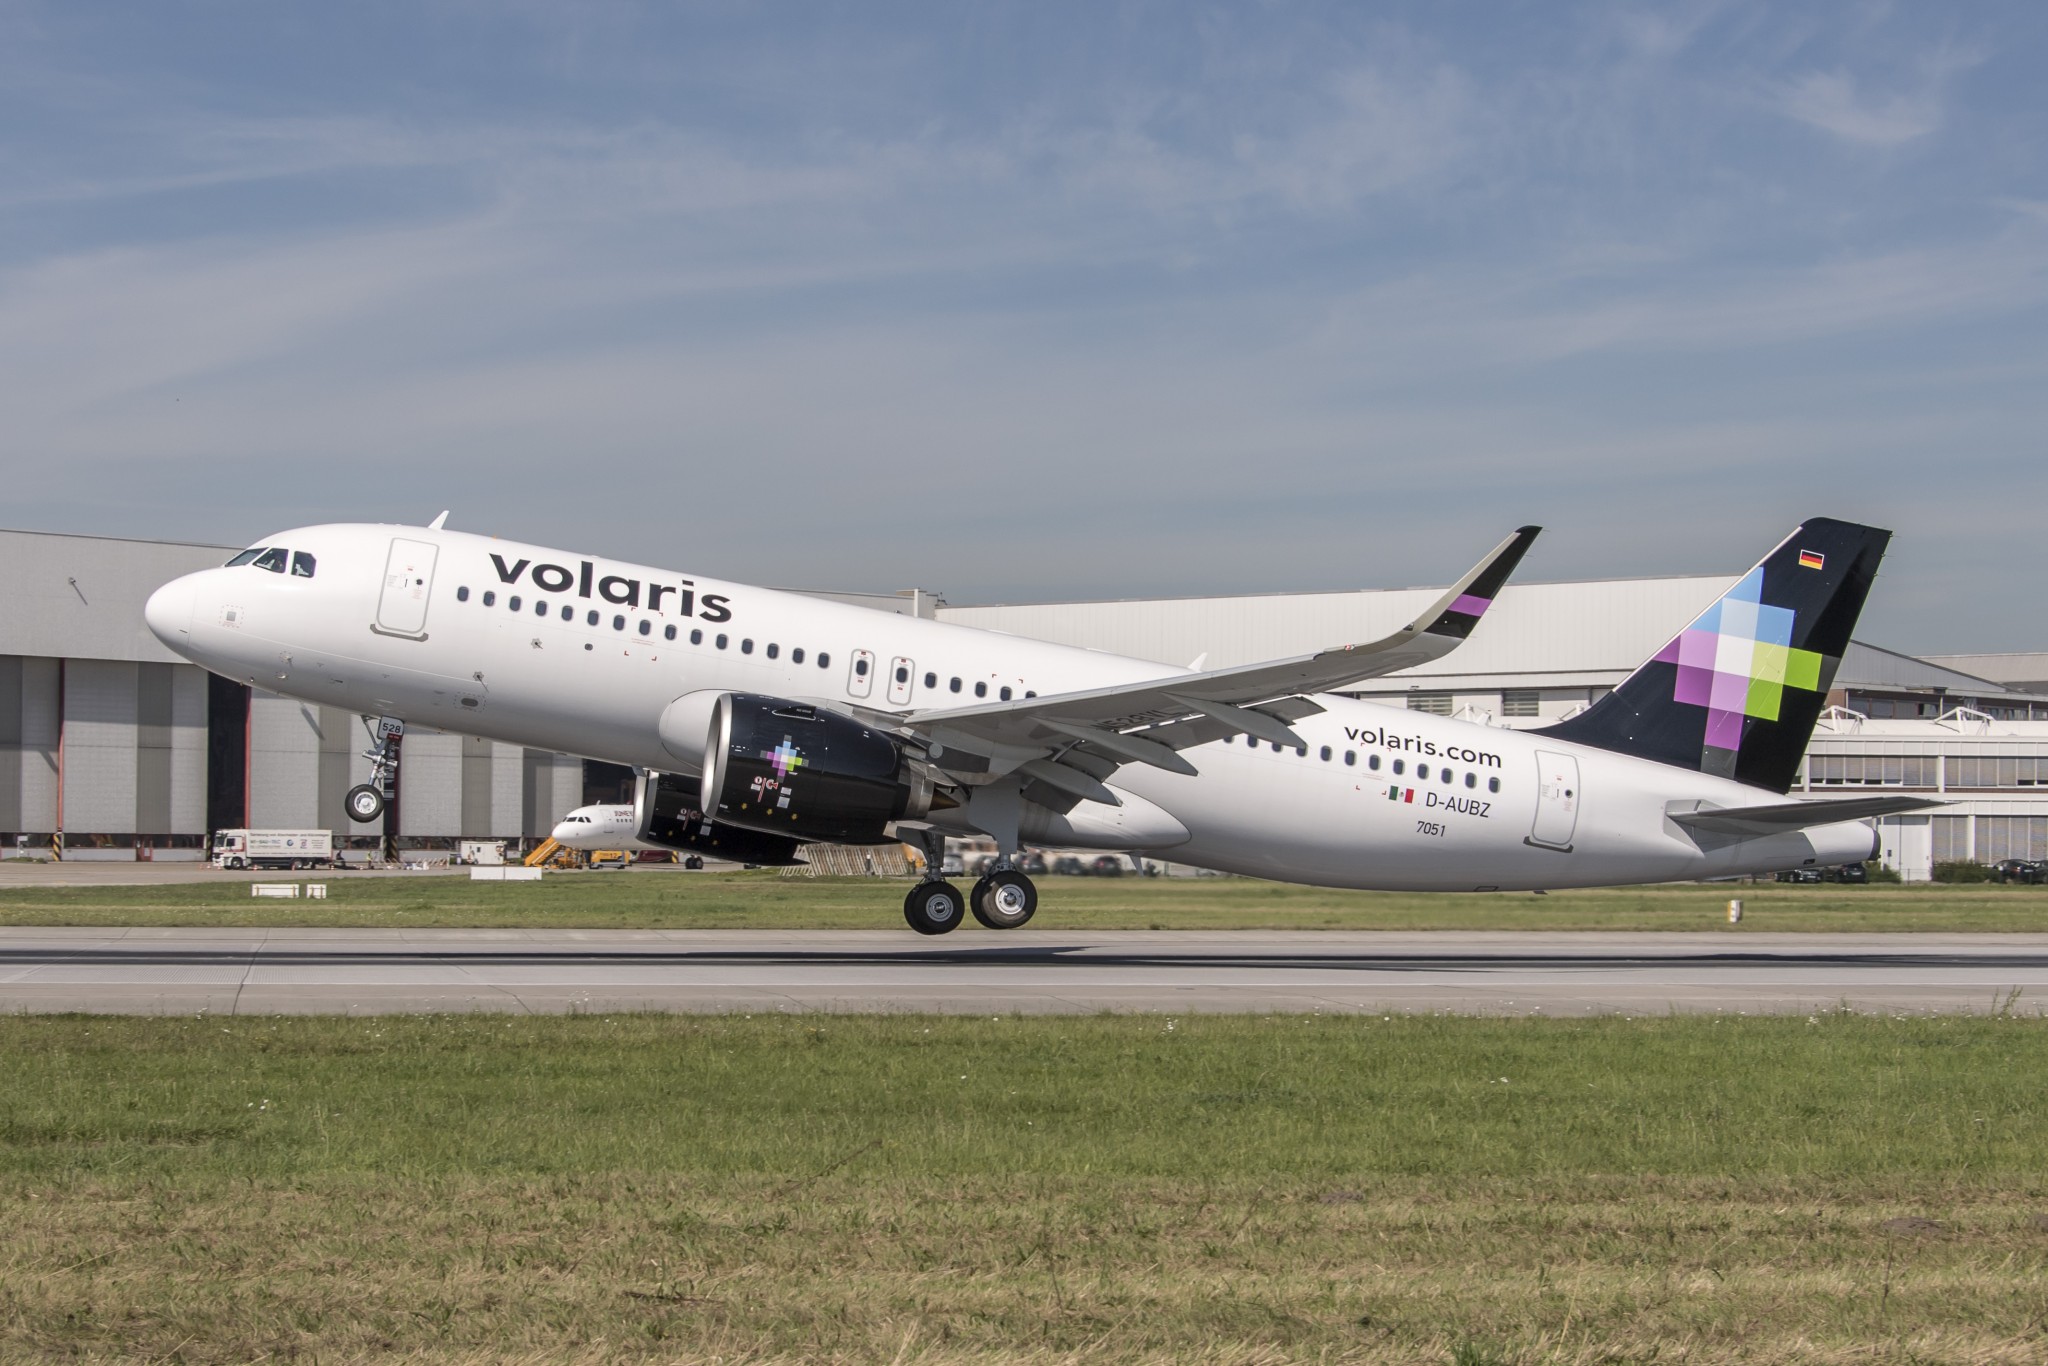 Volaris announces offering of notes valued at $78.3 million